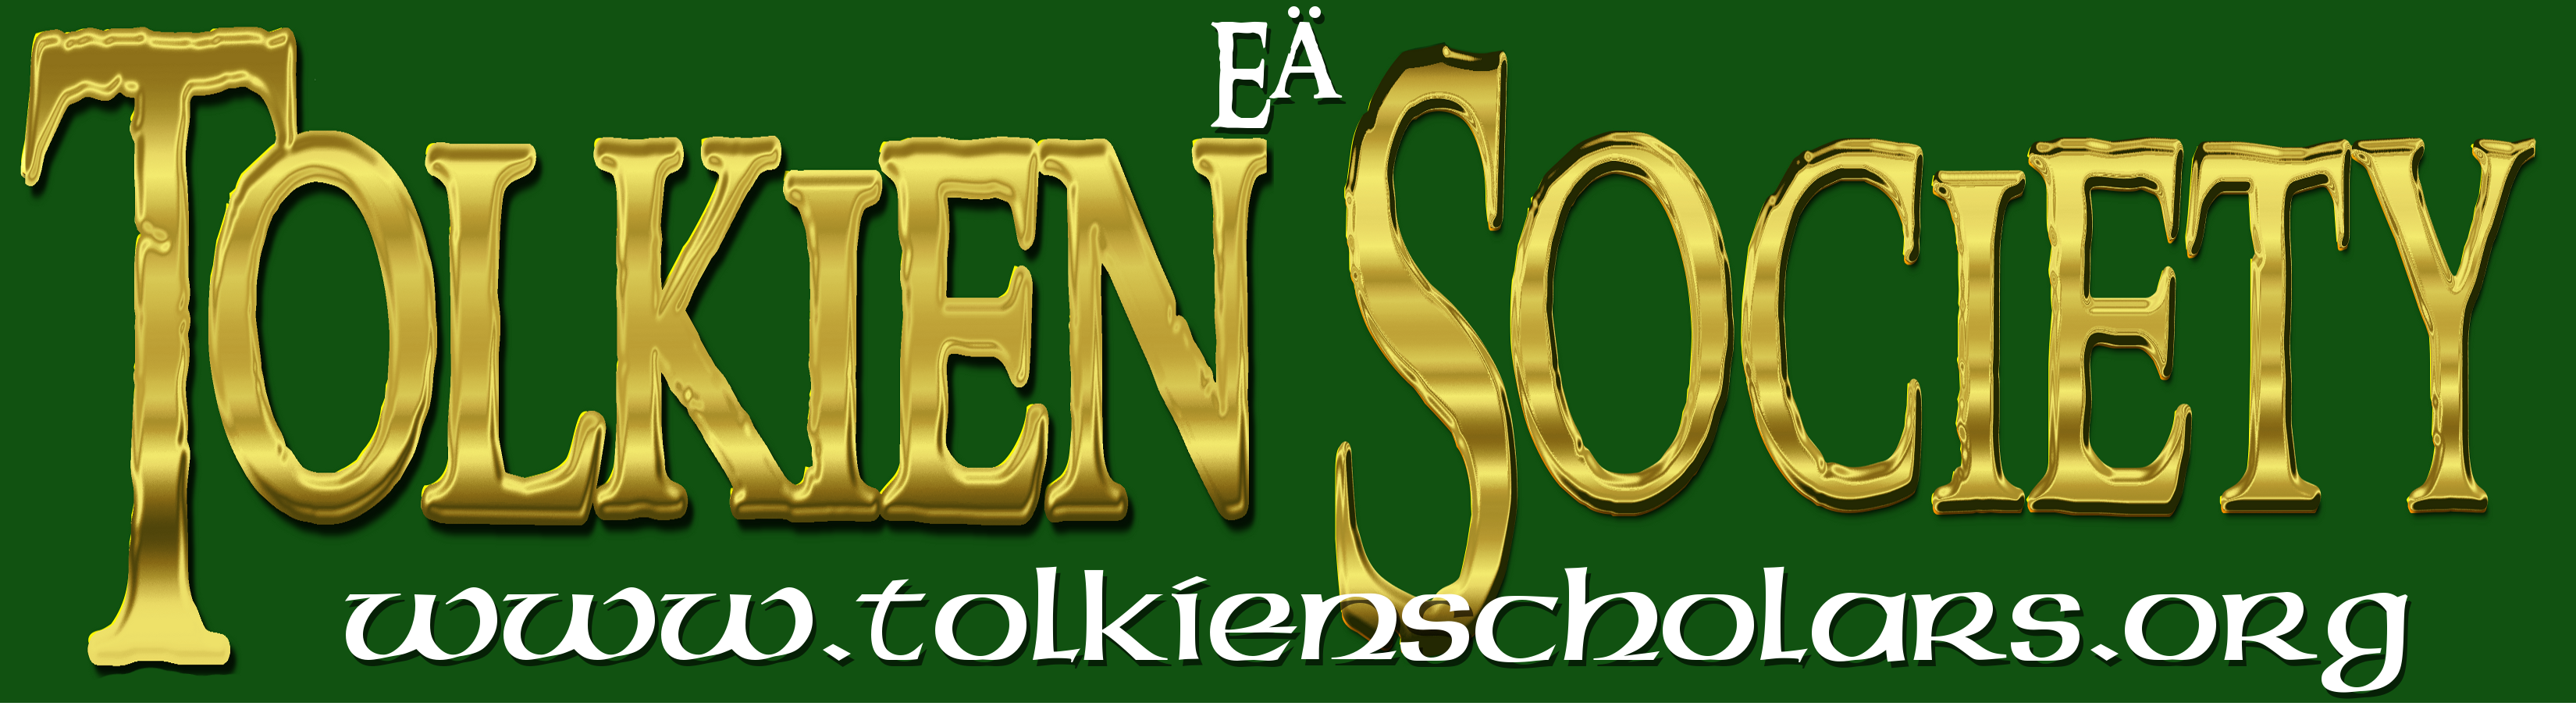 Eä Tolkien Society Meeting Notes for May 21st, 2022